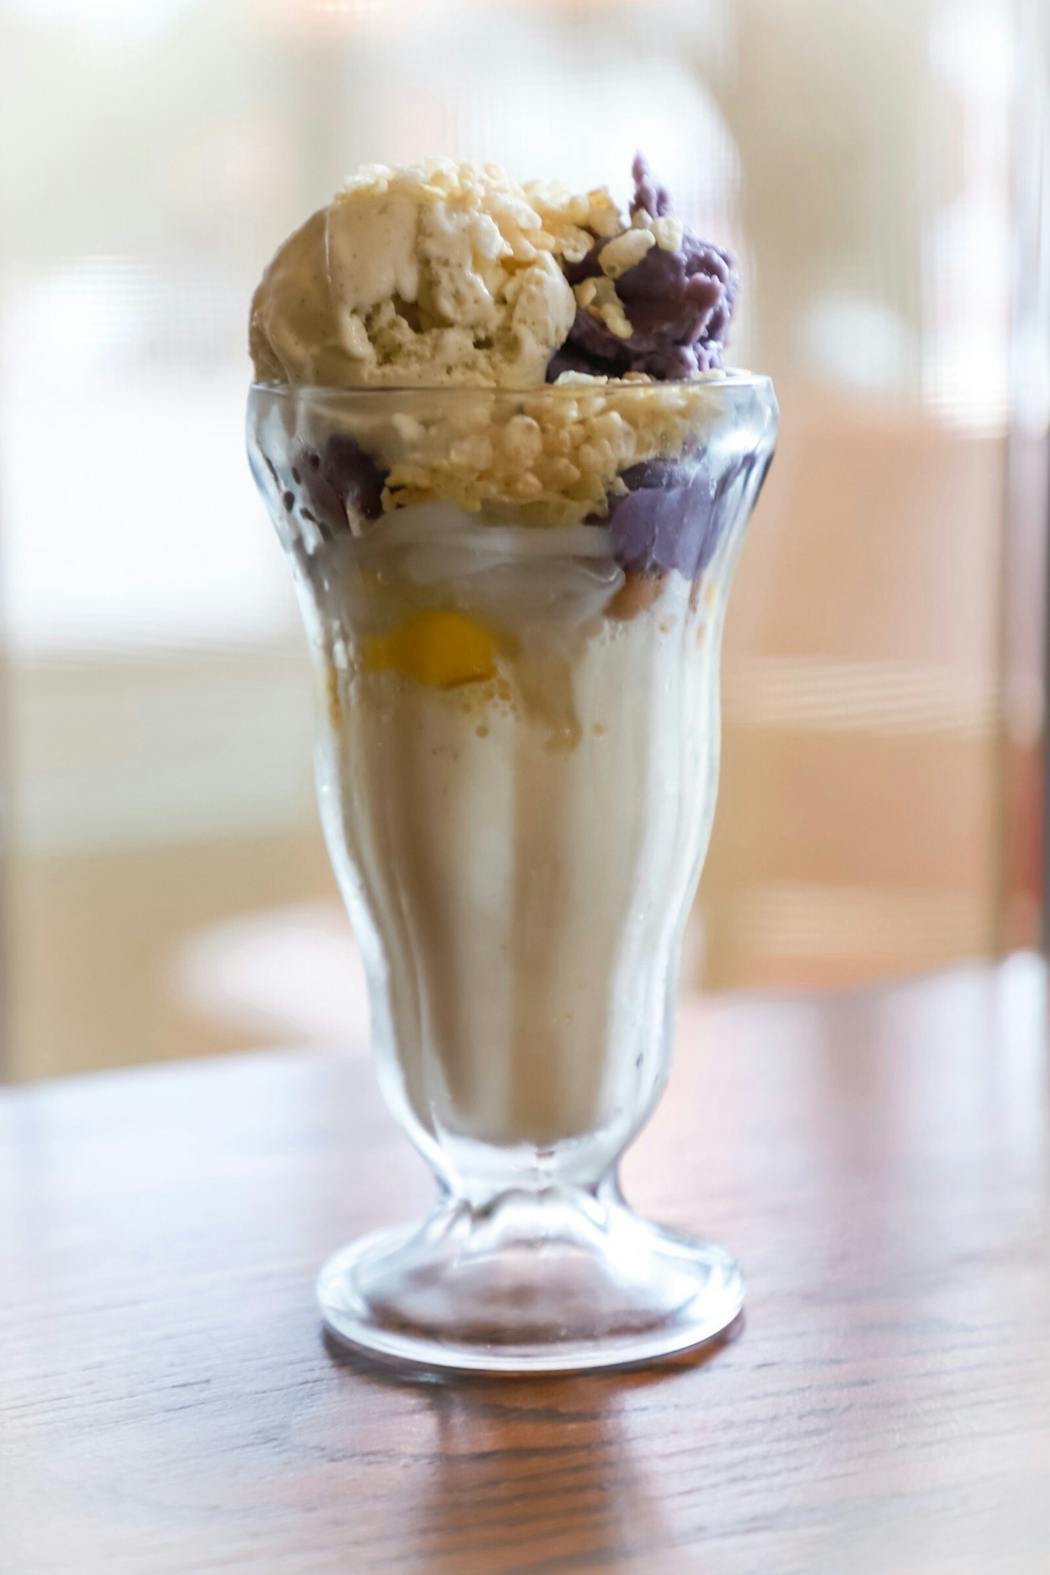 Halo Halo, a dessert of shaved ice and evaporated milk, at Apoy in South Minneapolis.